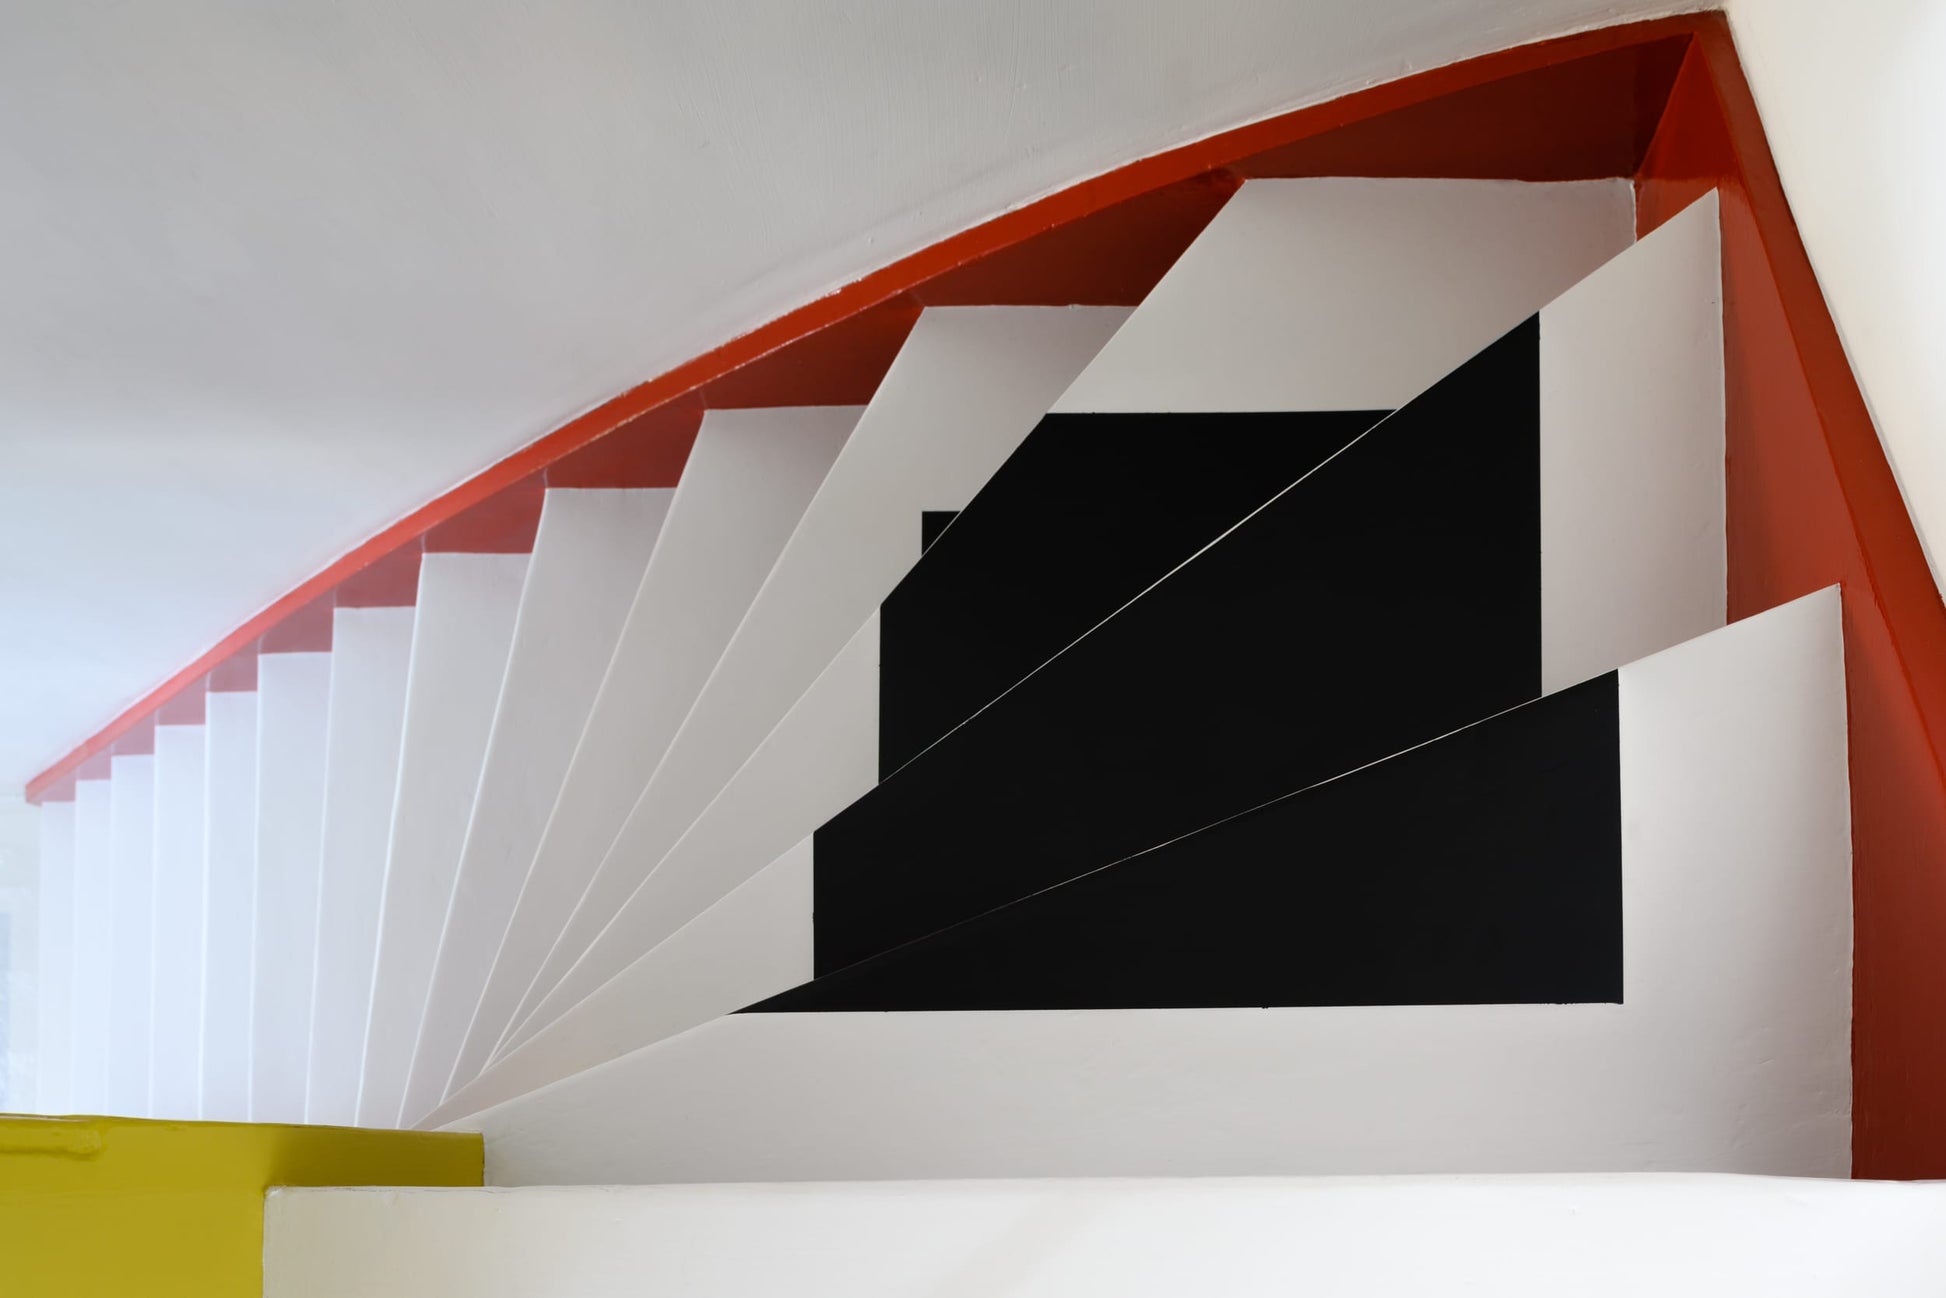 The artwork 'Van Doesburg-Rinsemahuis #10' by Jildo Tim Hof showing a flight of stairs as seen from above